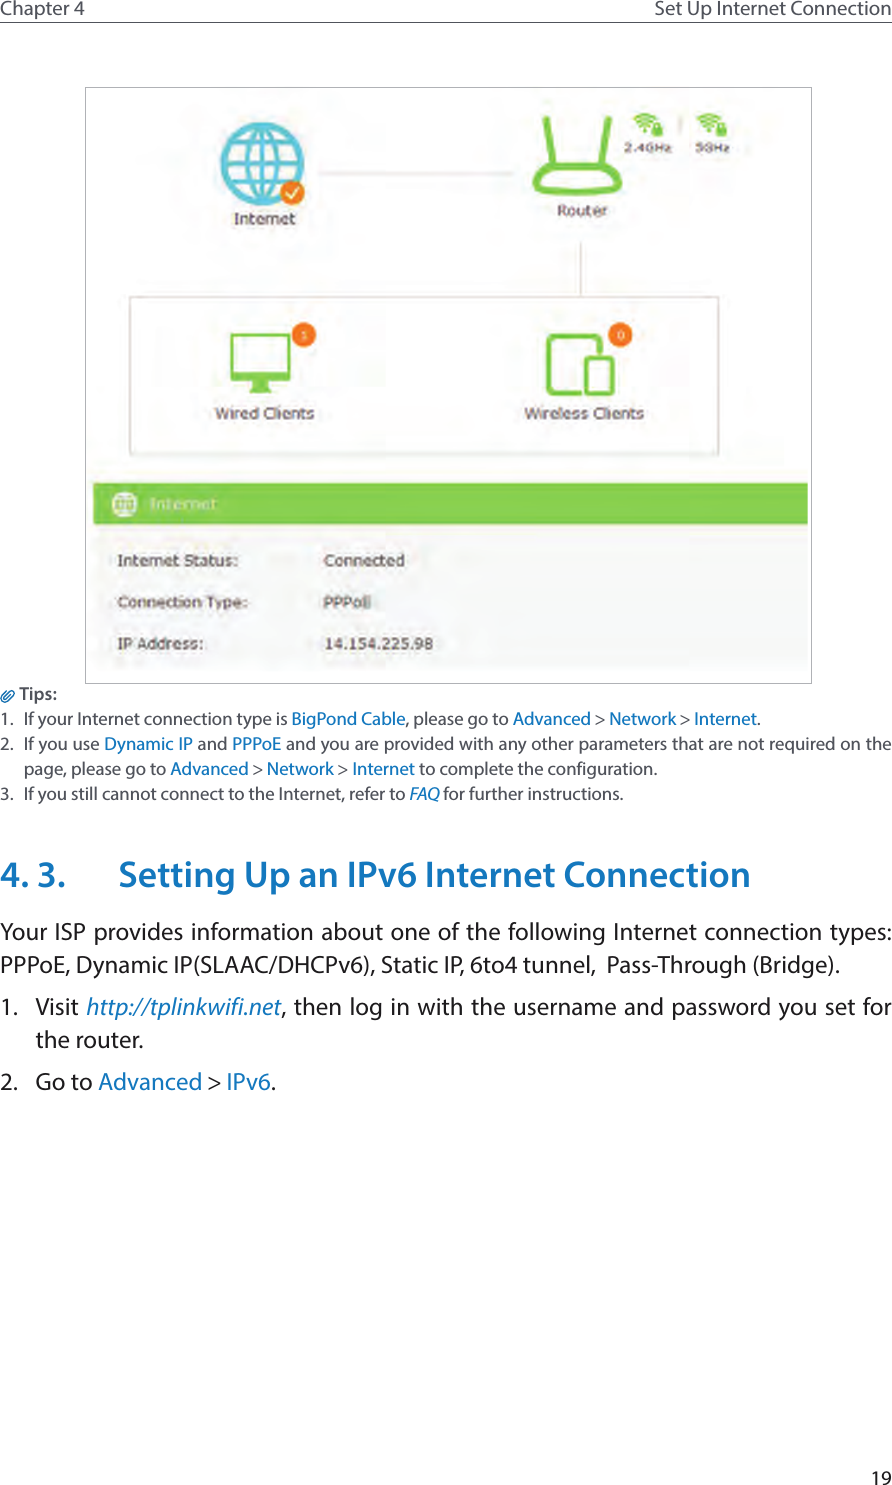 19Chapter 4 Set Up Internet Connection Tips: 1.  If your Internet connection type is BigPond Cable, please go to Advanced &gt; Network &gt; Internet.2.  If you use Dynamic IP and PPPoE and you are provided with any other parameters that are not required on the page, please go to Advanced &gt; Network &gt; Internet to complete the configuration.3.  If you still cannot connect to the Internet, refer to FAQ for further instructions.4. 3.  Setting Up an IPv6 Internet ConnectionYour ISP provides information about one of the following Internet connection types: PPPoE, Dynamic IP(SLAAC/DHCPv6), Static IP, 6to4 tunnel,  Pass-Through (Bridge).1.  Visit http://tplinkwifi.net, then log in with the username and password you set for the router.2.  Go to Advanced &gt; IPv6.